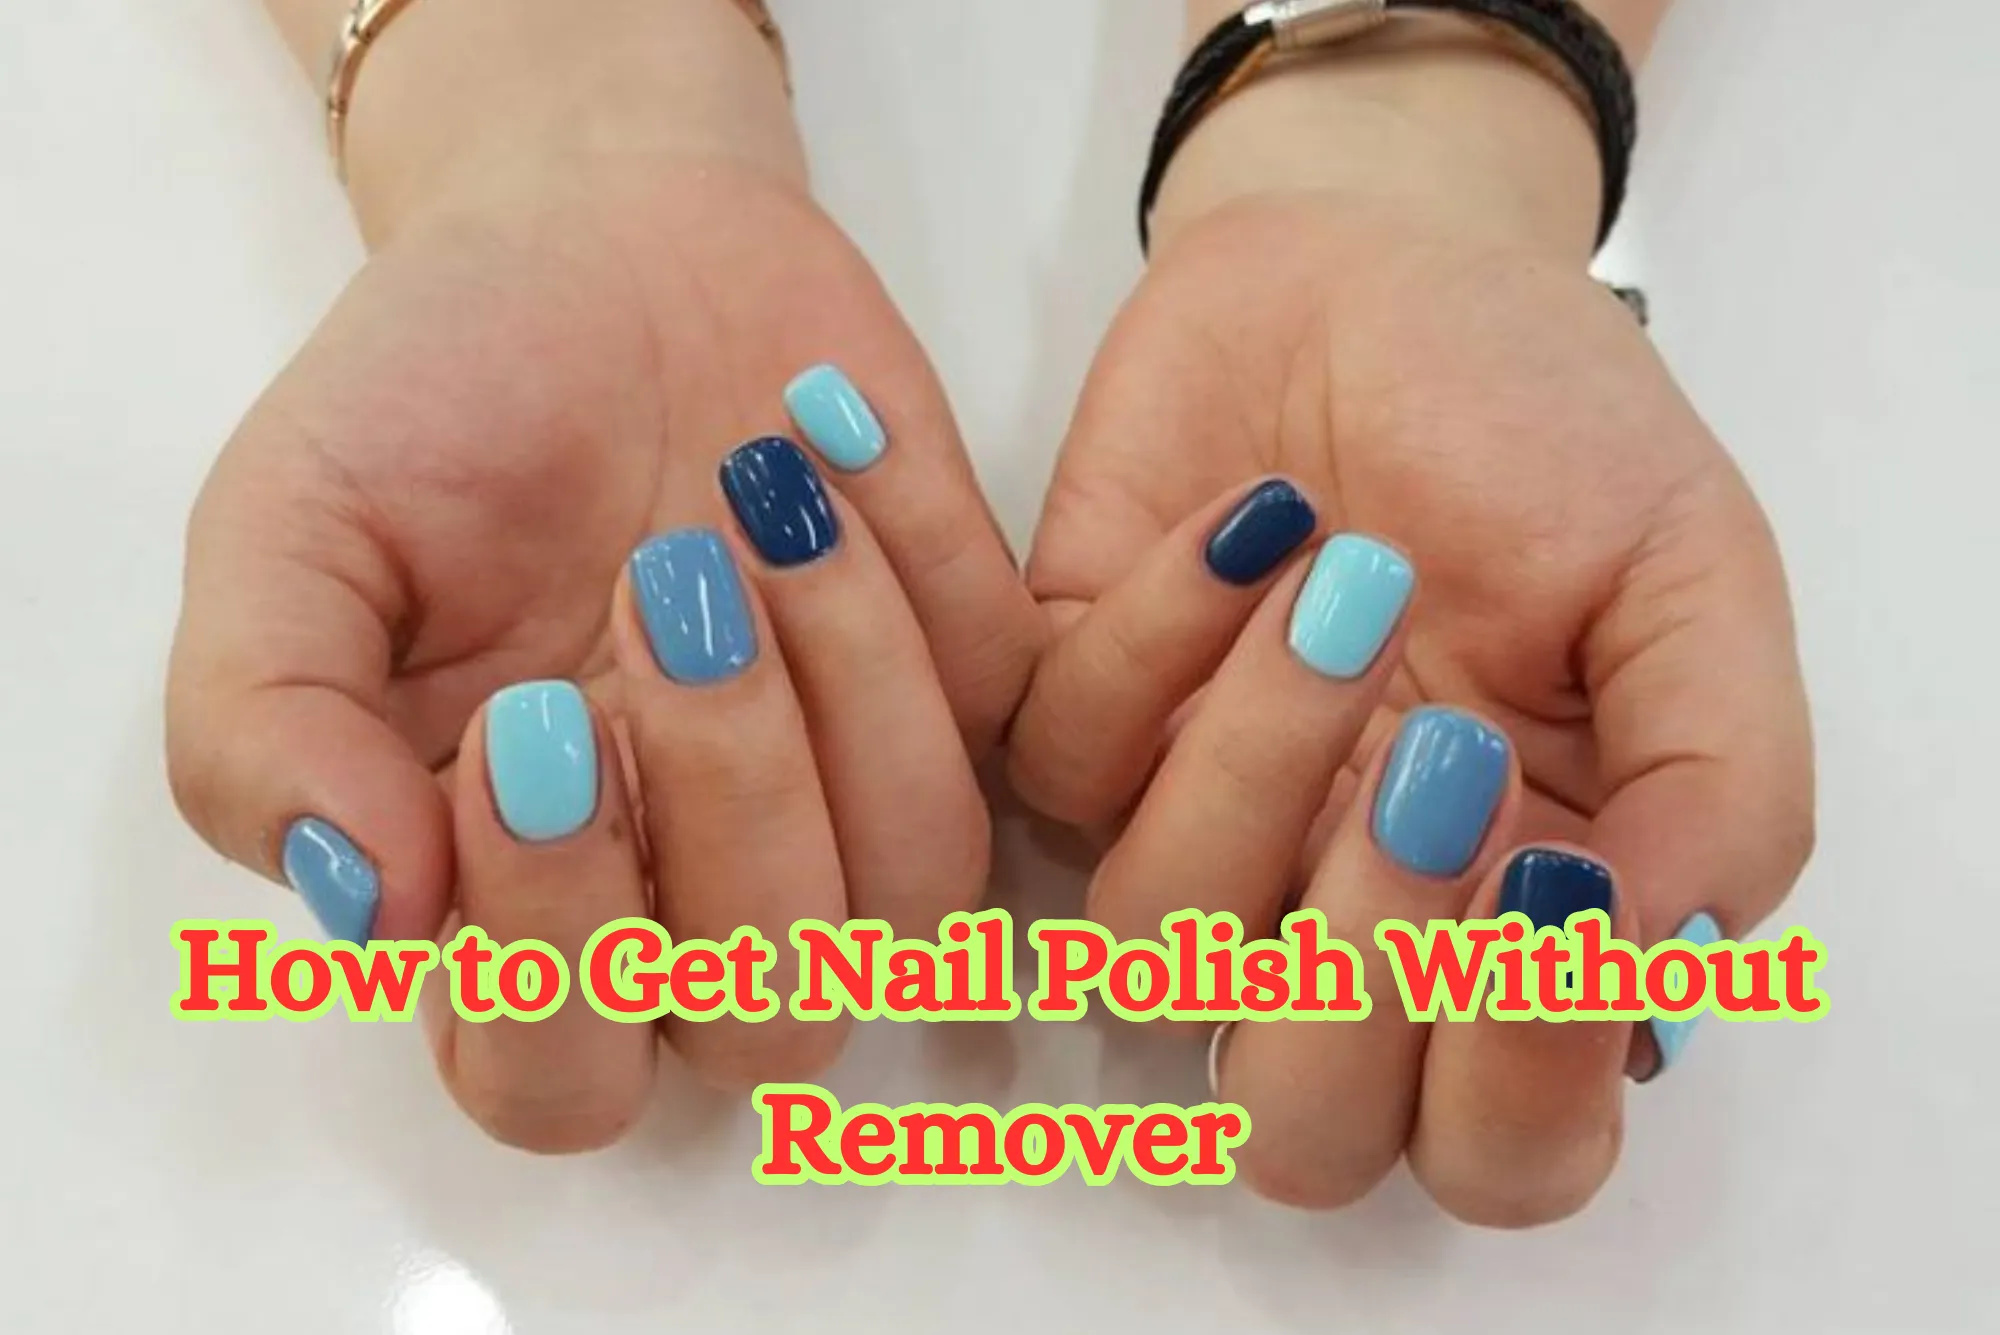 How to Get Nail Polish Without Remover